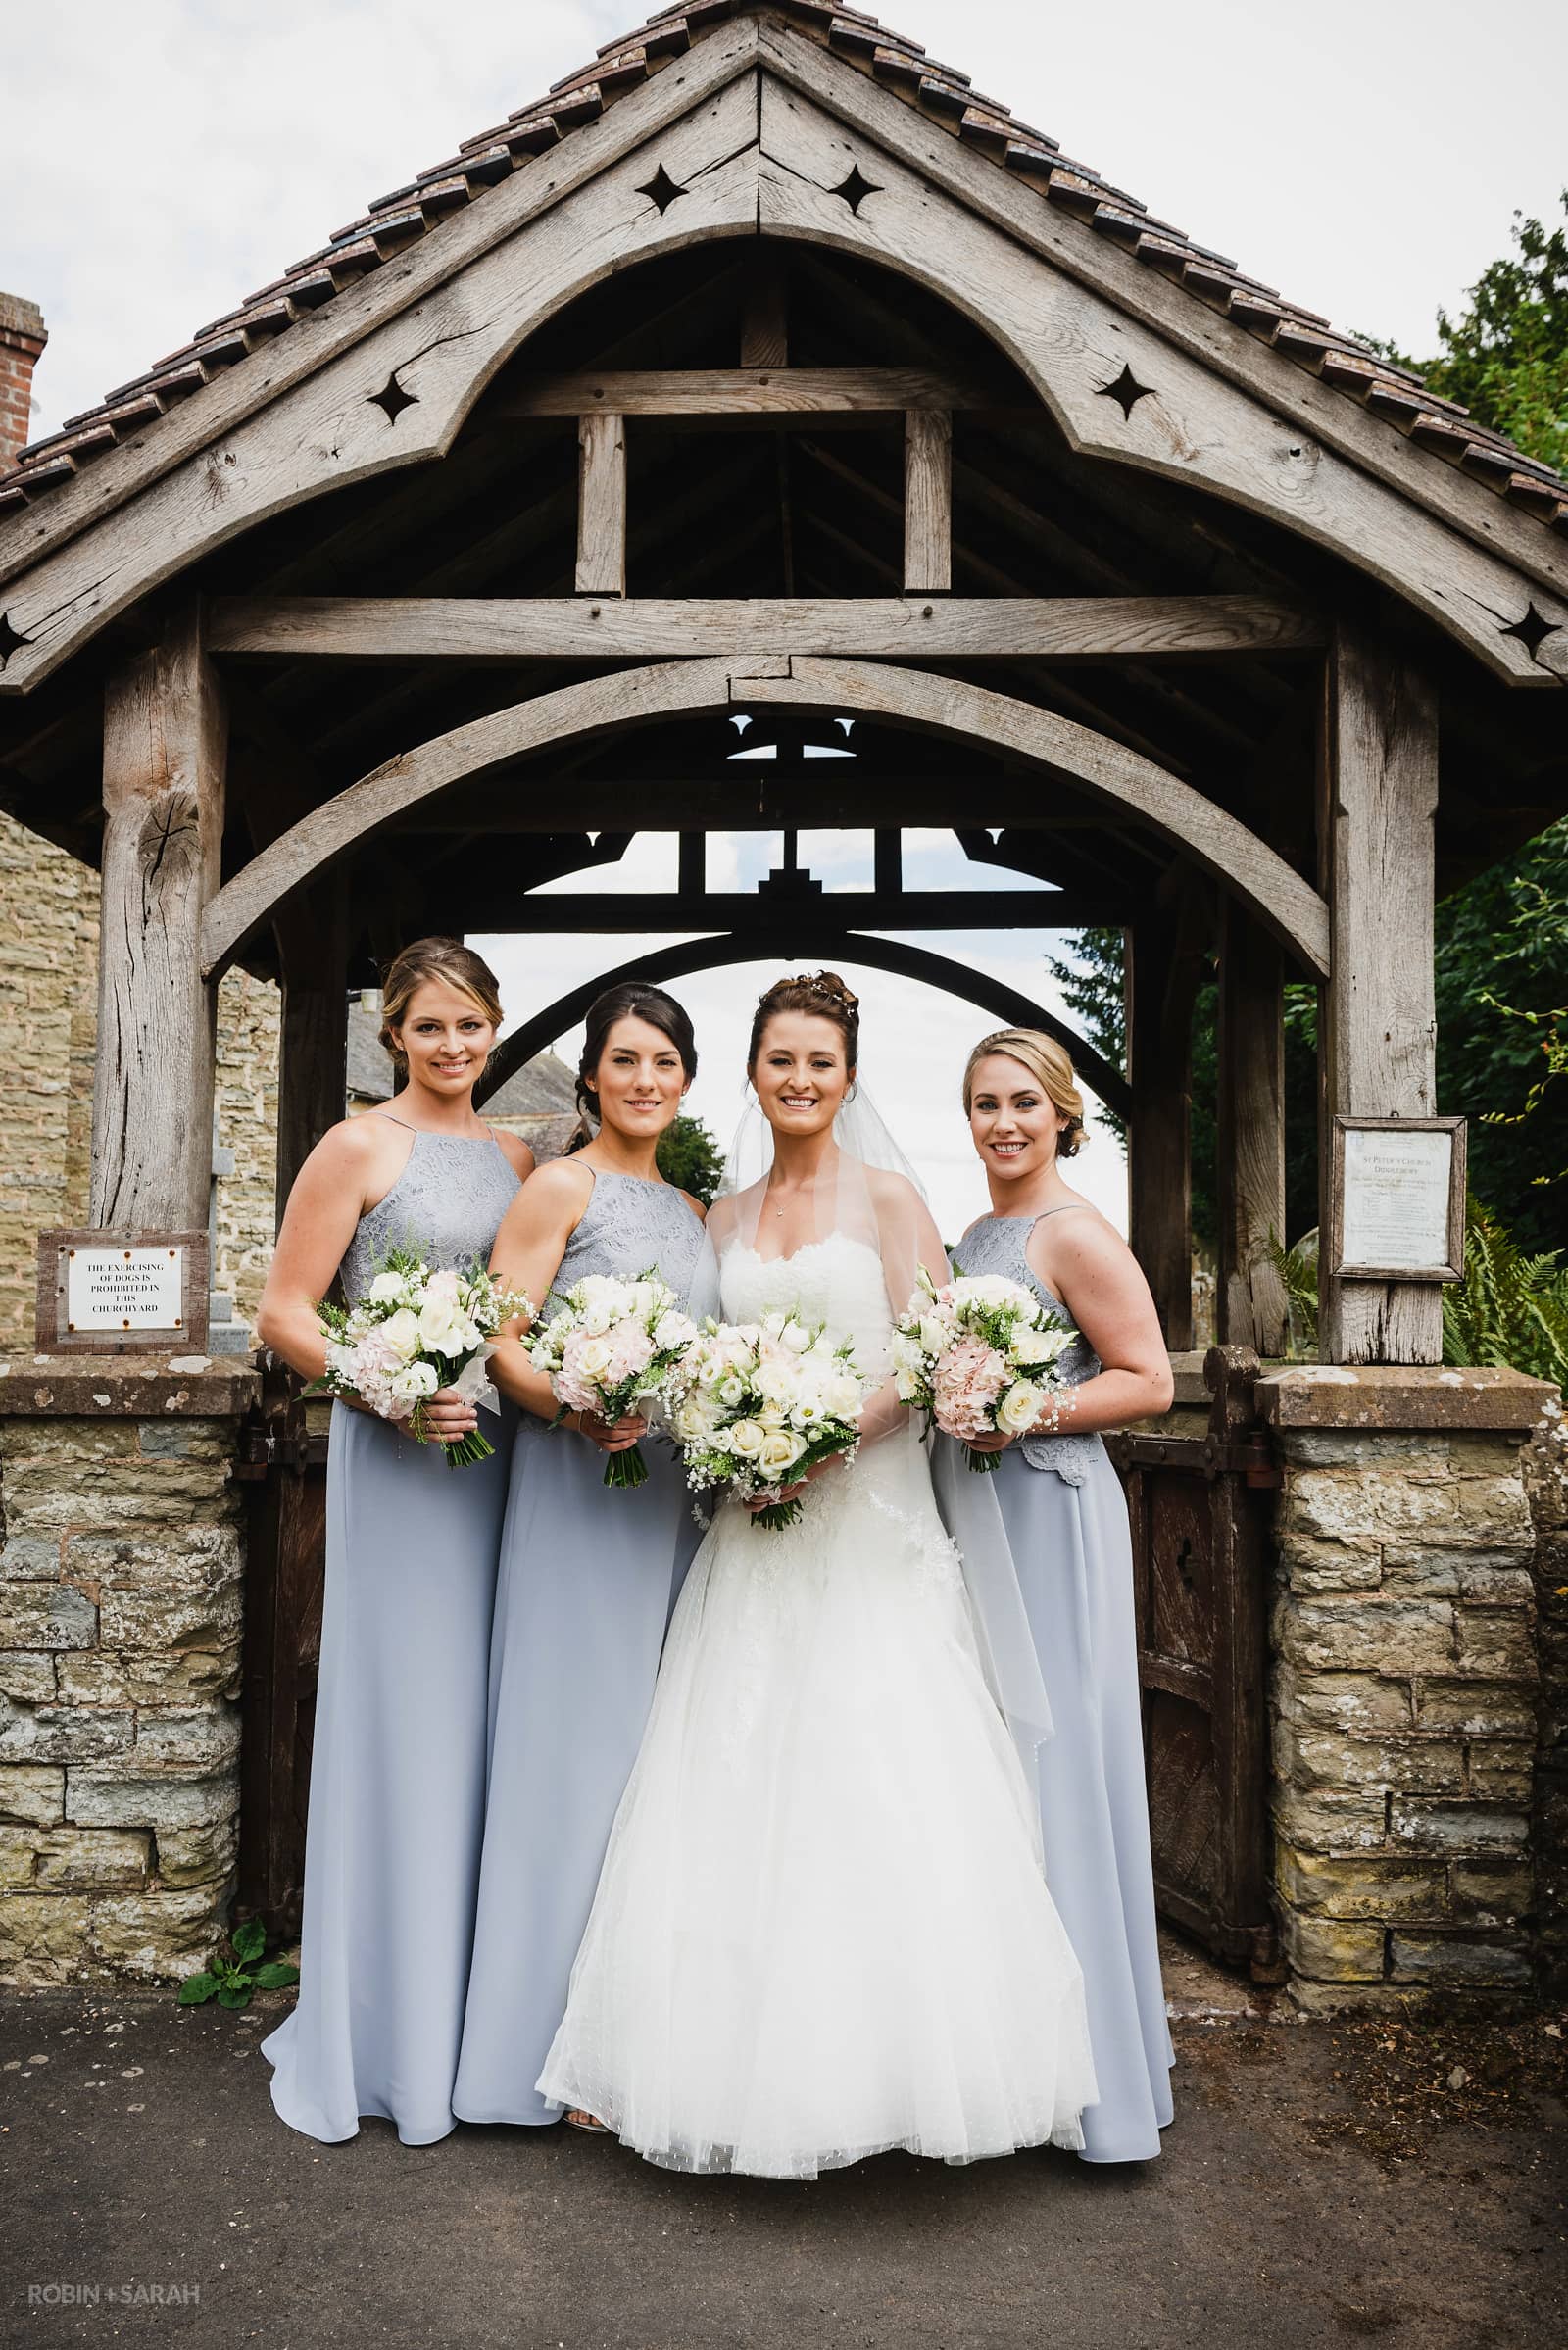 Group photo of bride and bridesmaids at St Peter's Church Diddlebury